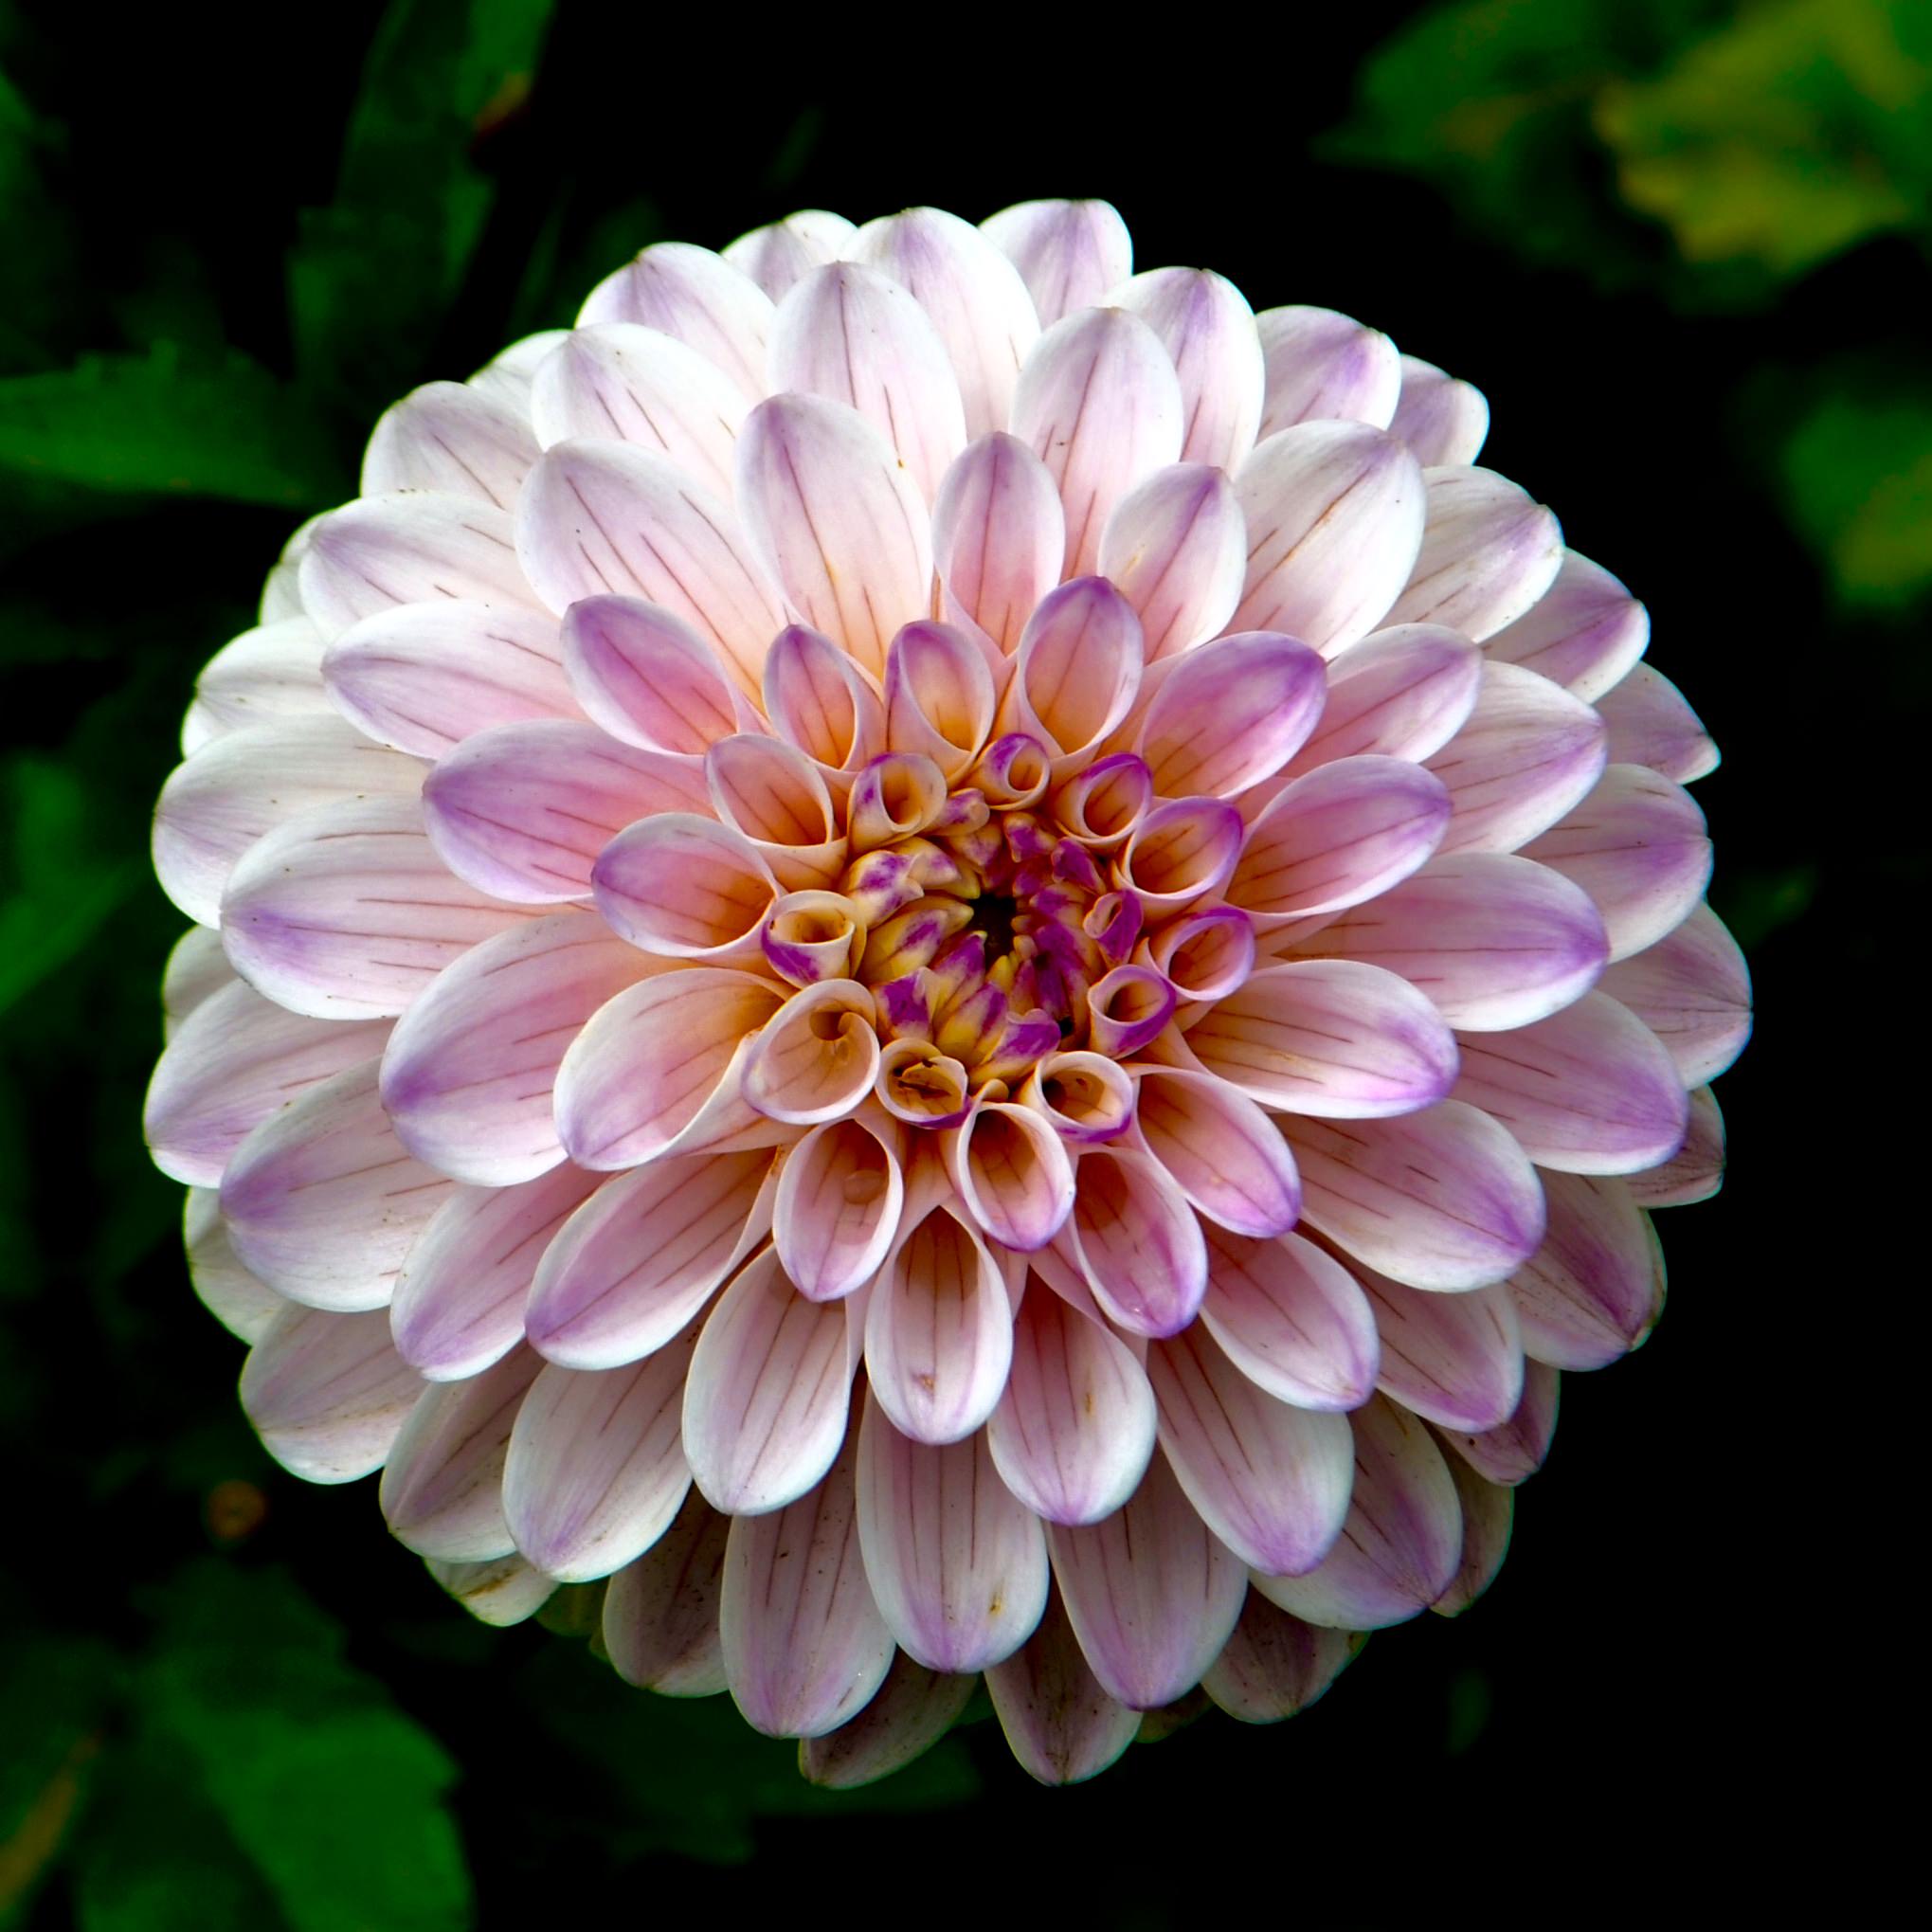 image of a pretty flower